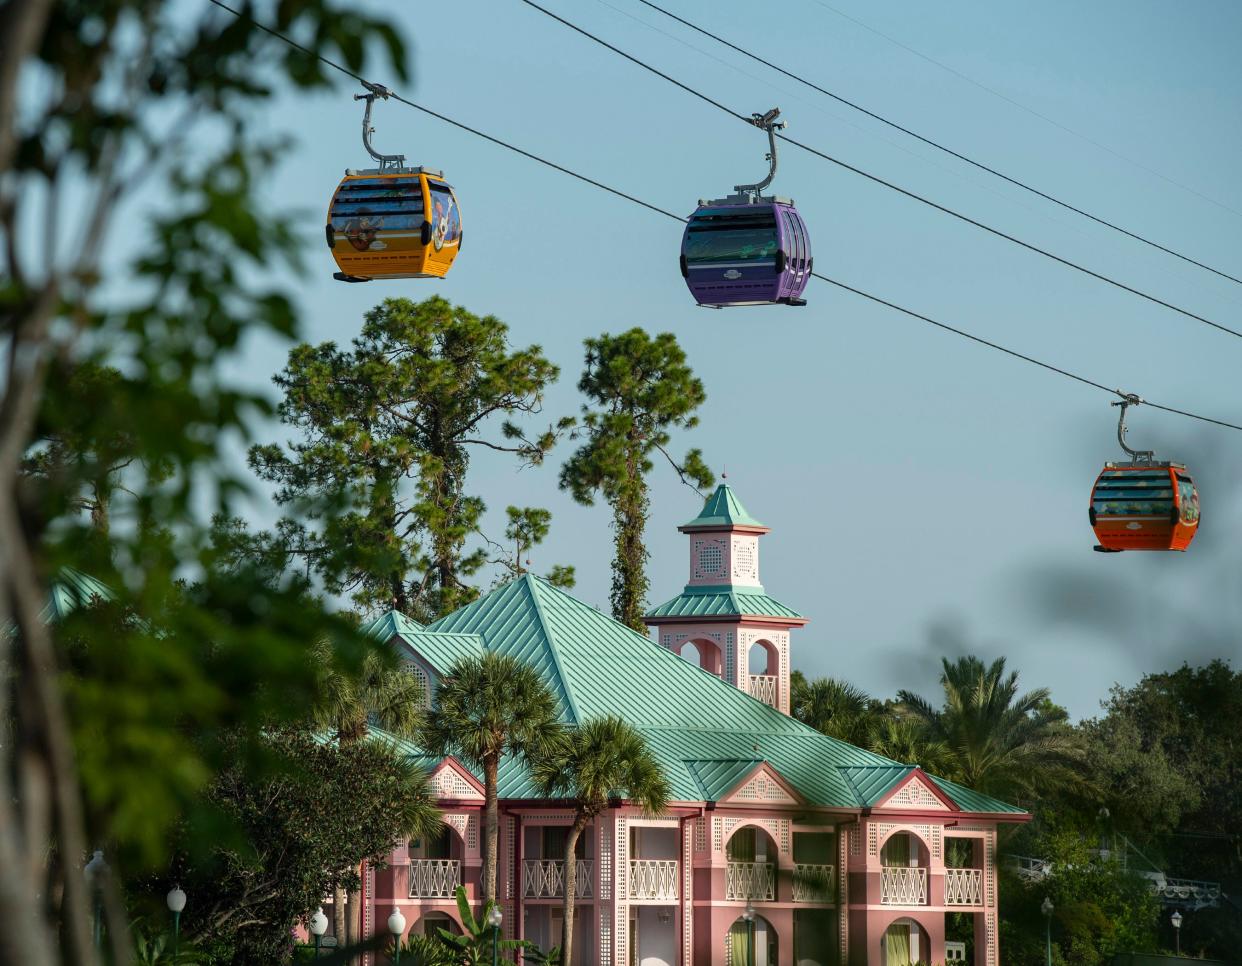 Disney’s Caribbean Beach Resort is a hub for Disney's Skyliner, which carries guests between select resort hotels, EPCOT and Disney's Hollywood Studios.